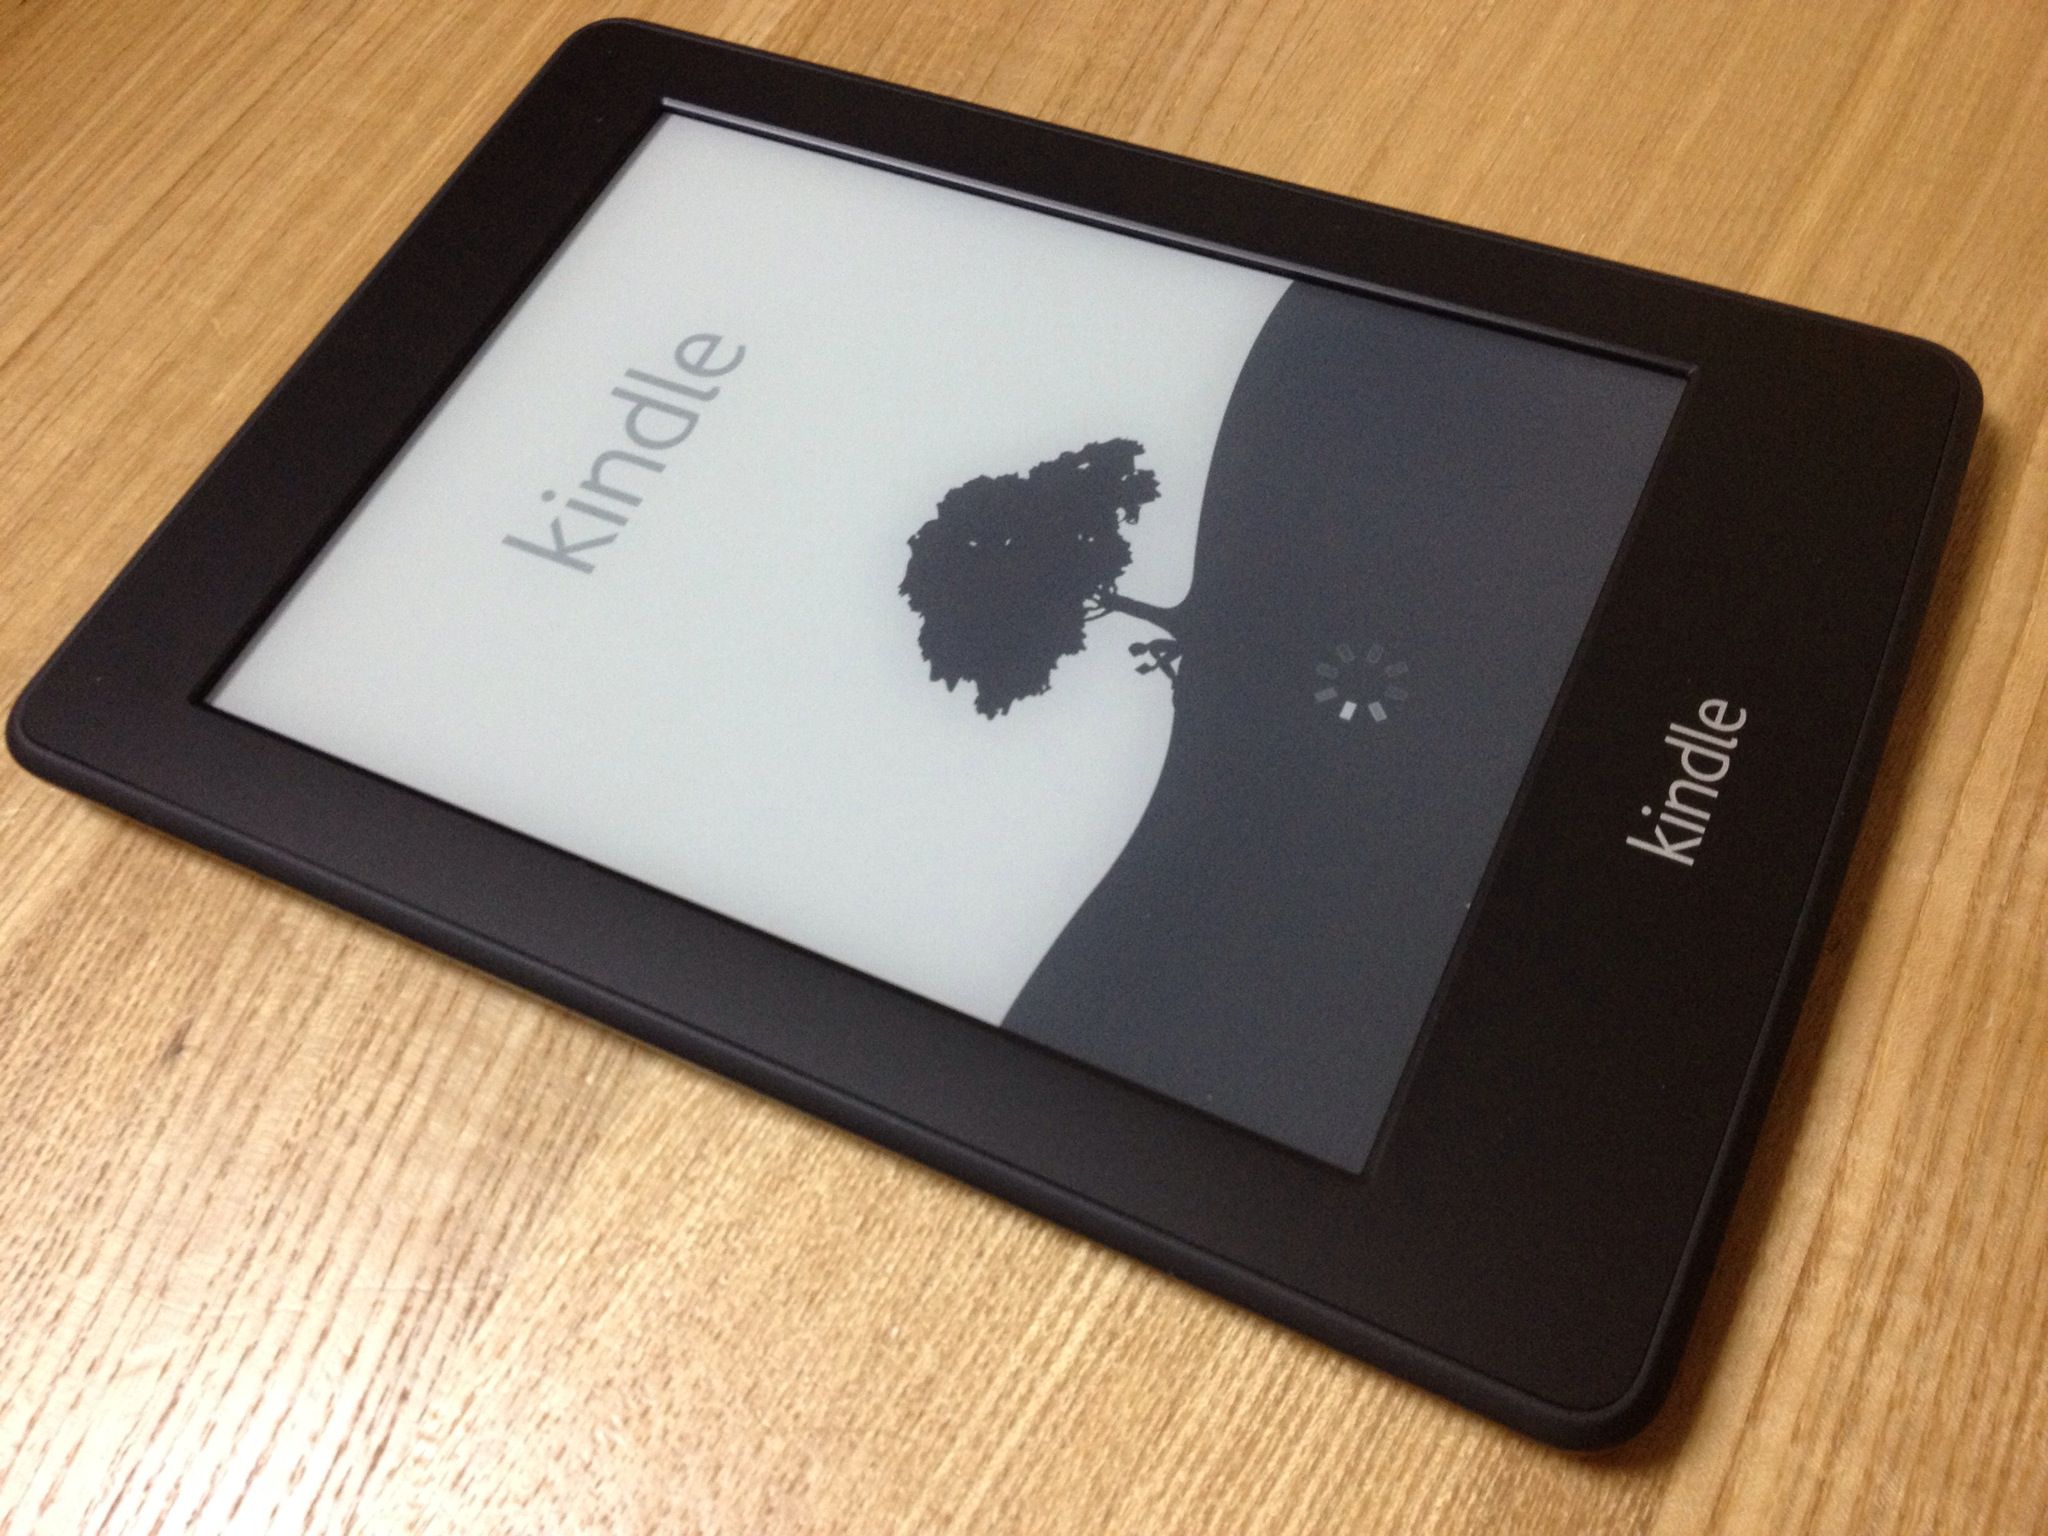 is there any way to get kindle books for free